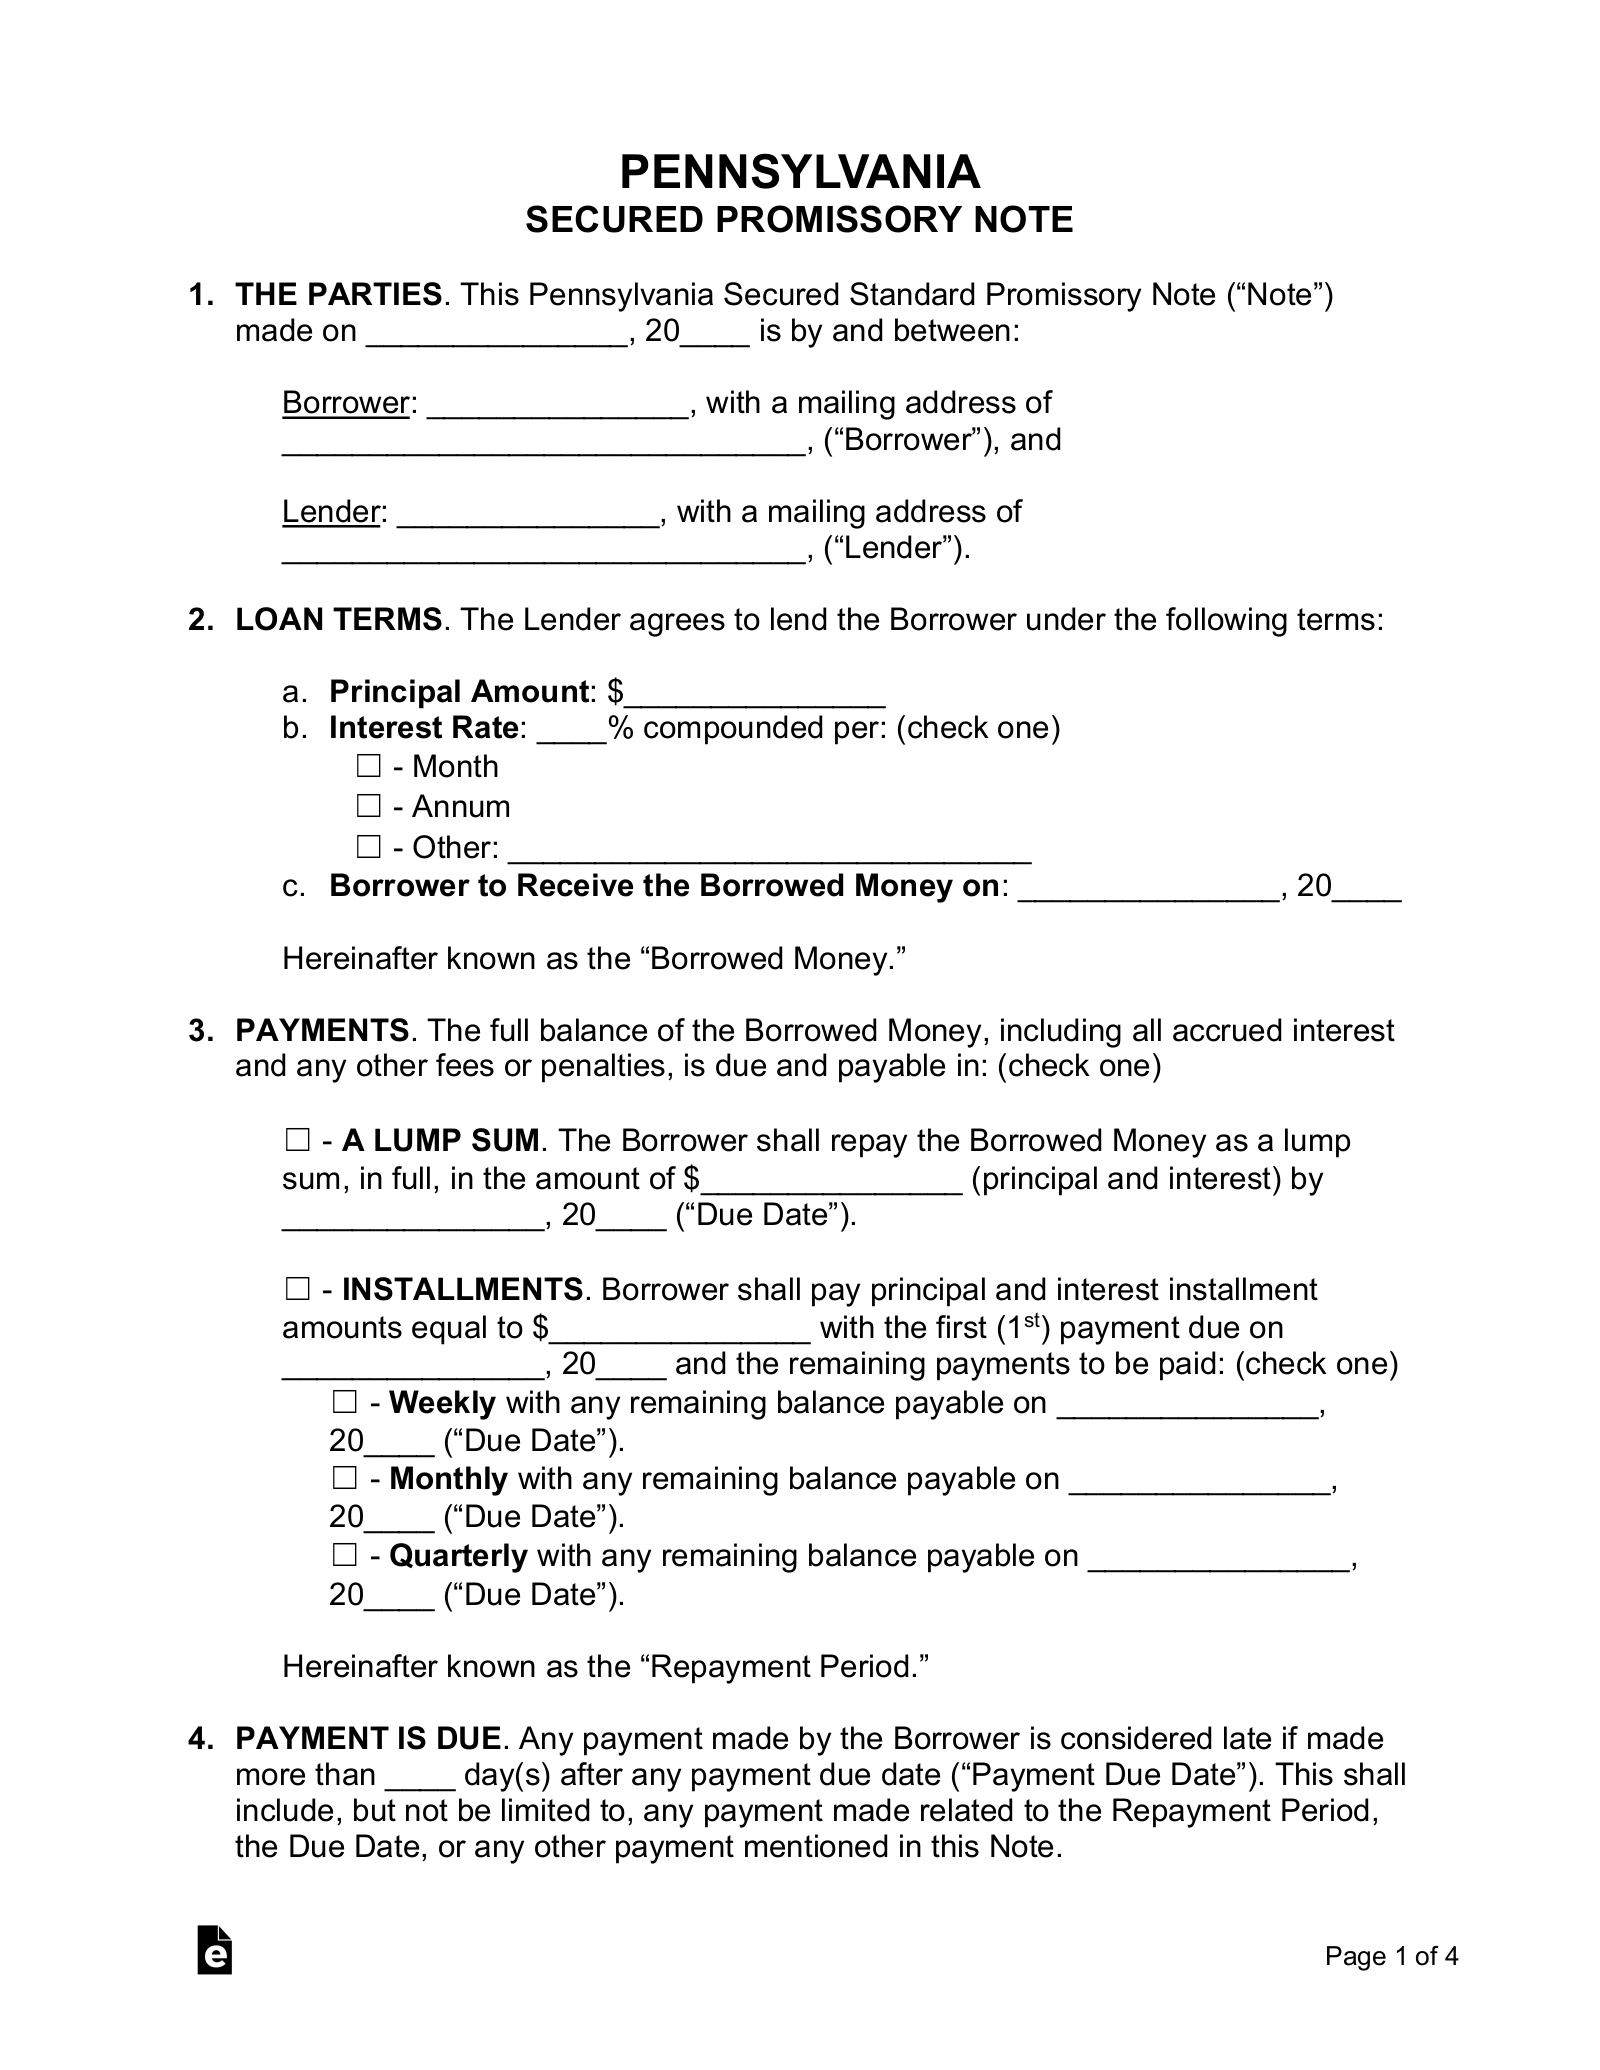 Pennsylvania Secured Promissory Note Template